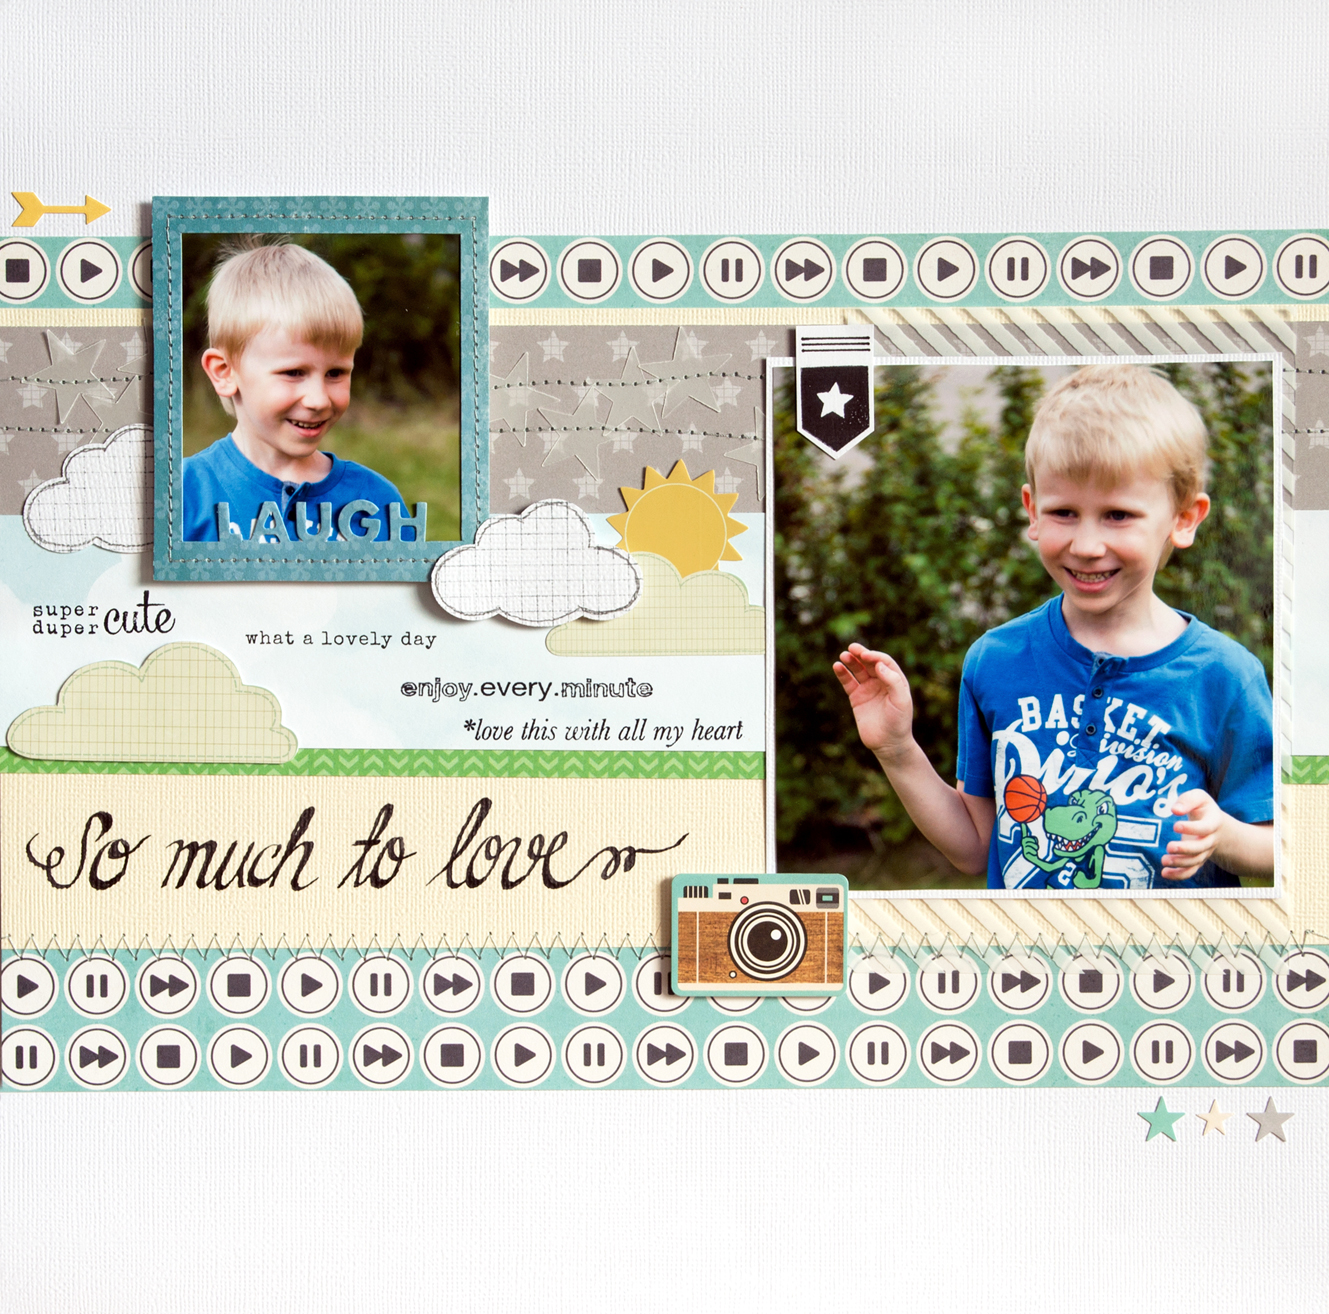 Scrapbooking layout using Creative Scrappers sketch #274: So much to love